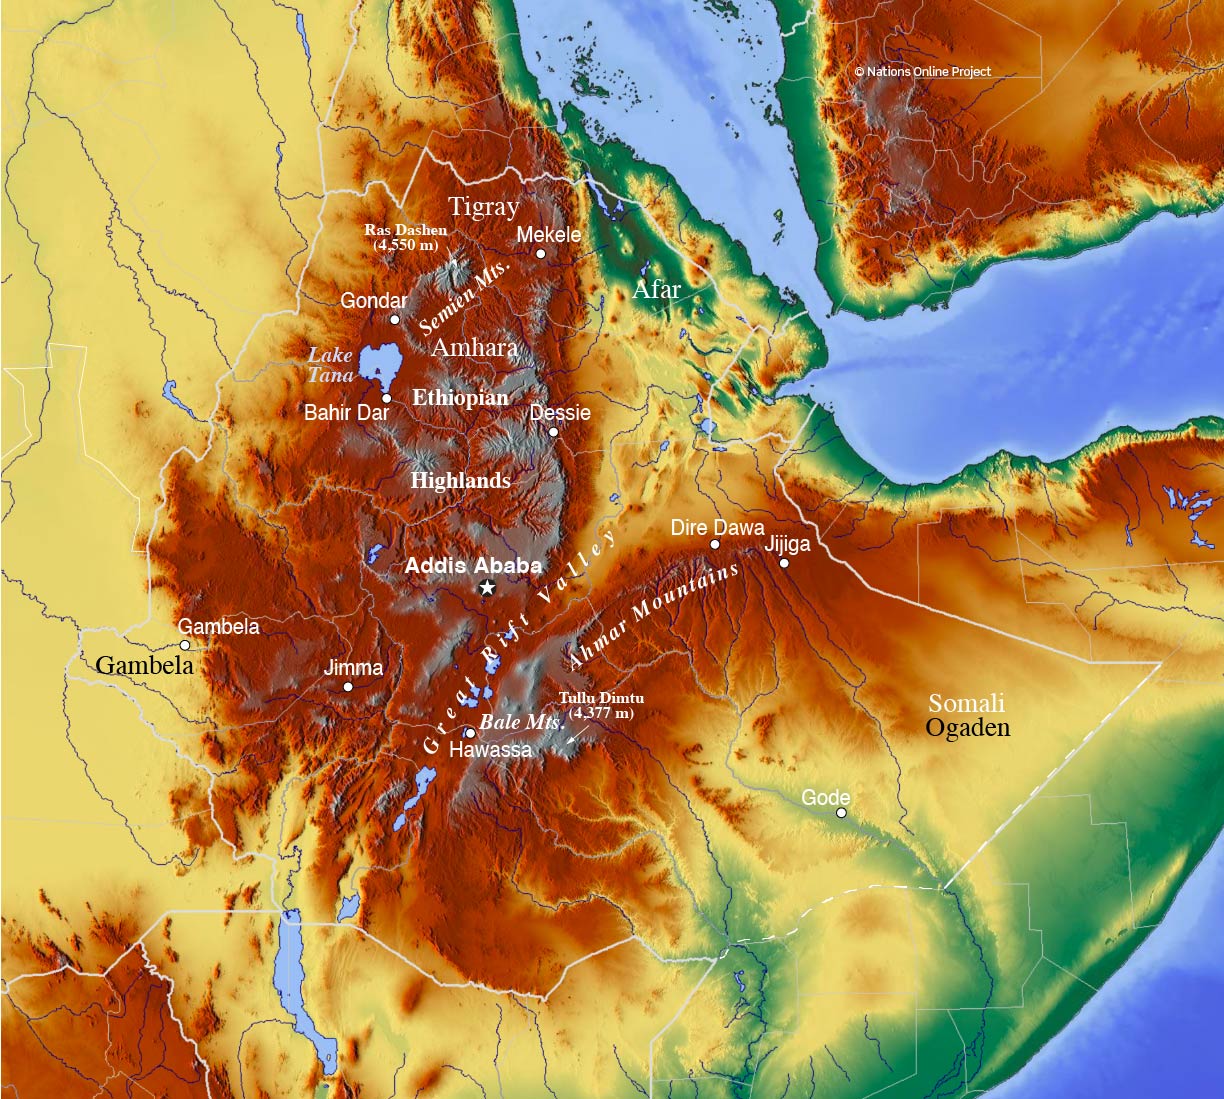 The topographic map of Ethiopia shows major geographic features of the country.